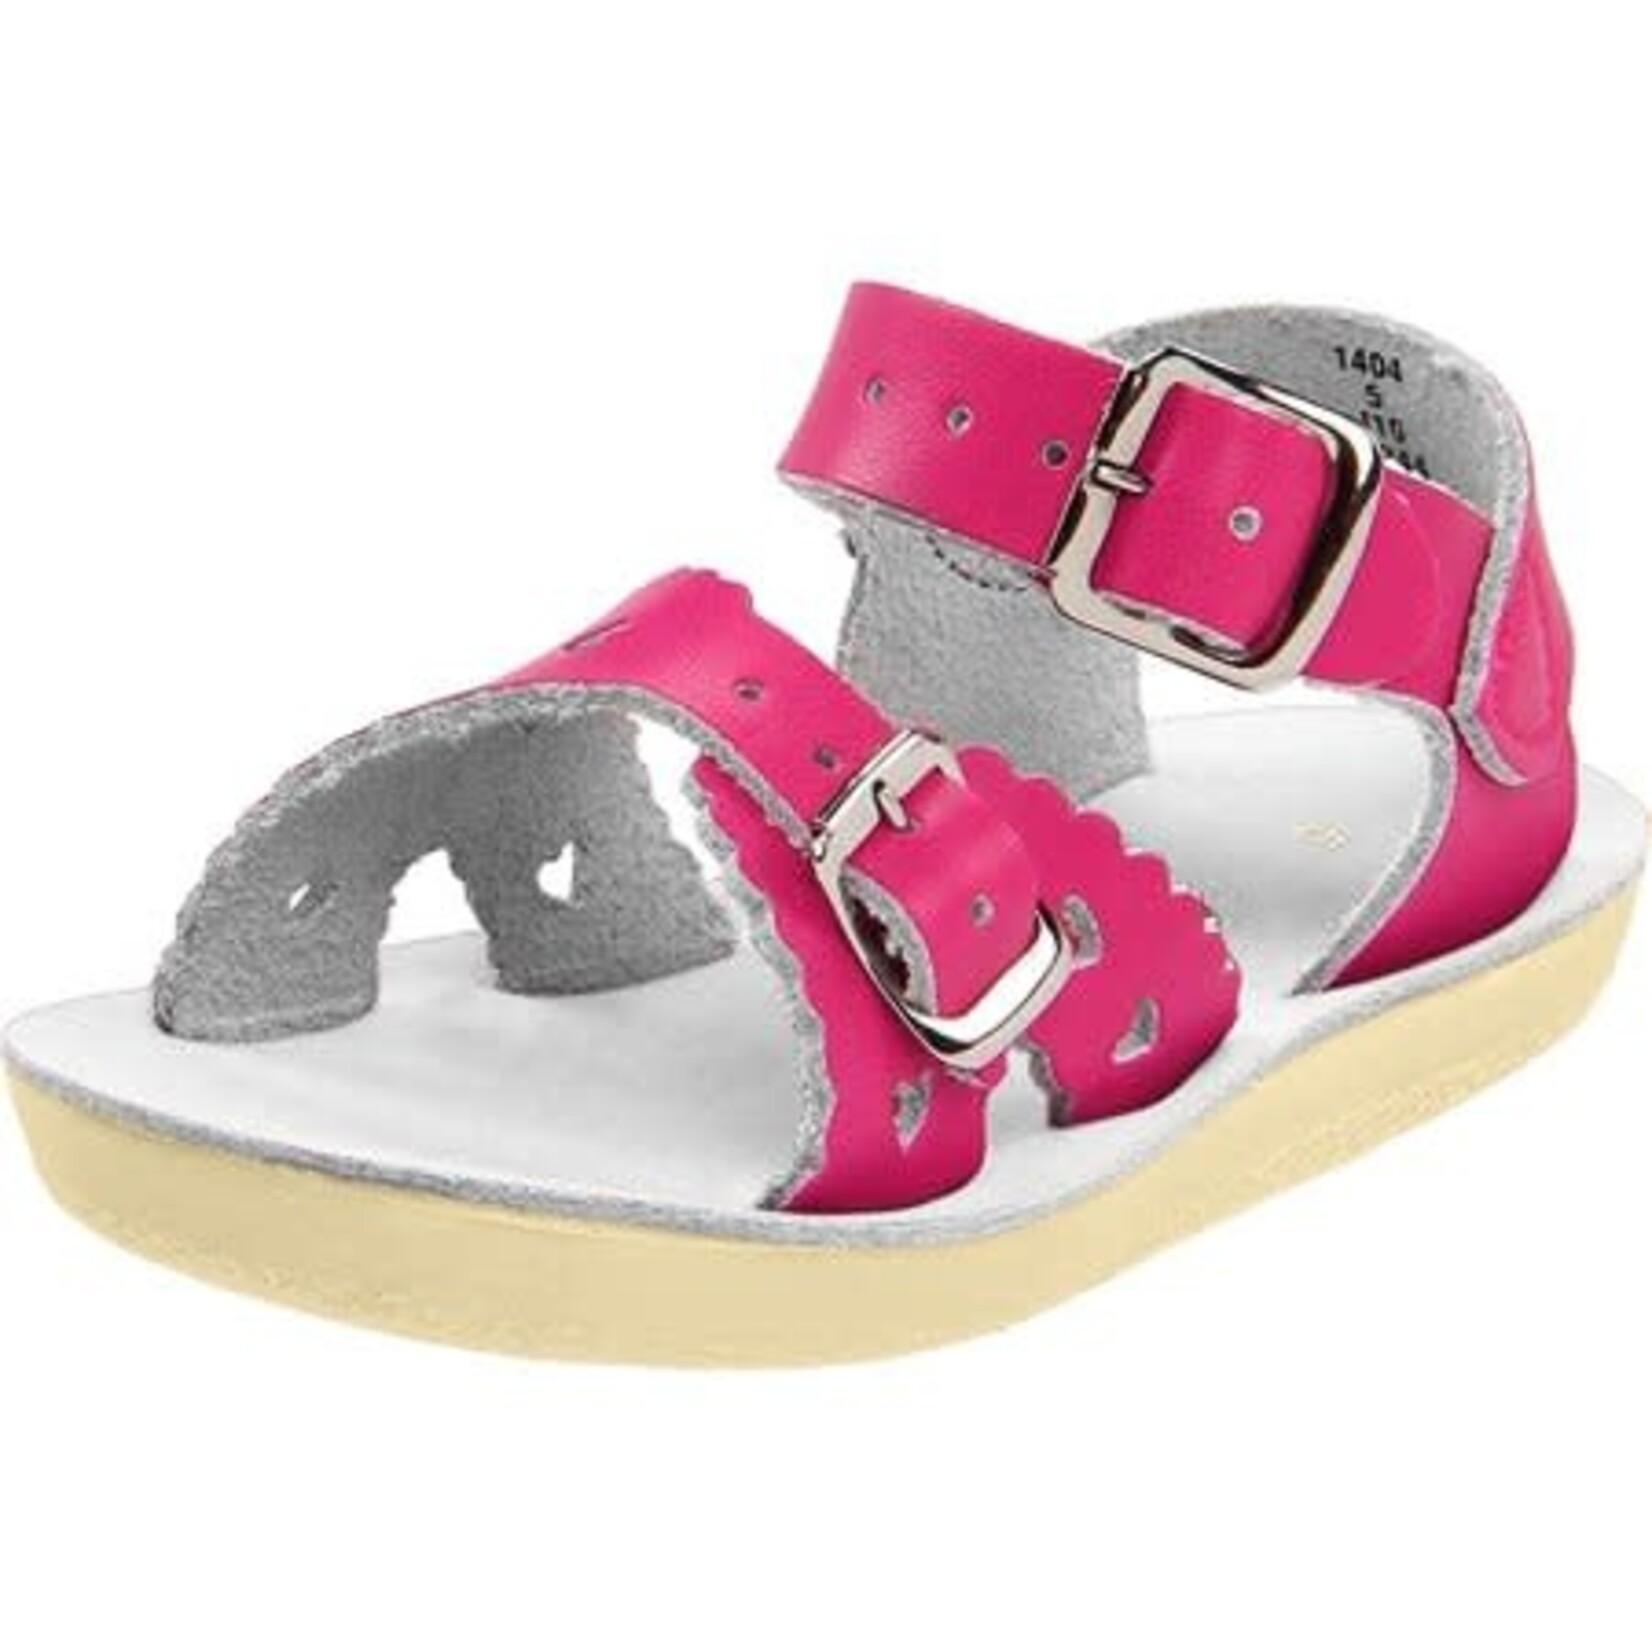 Saltwater Sandals SALTWATER SANDALS - Open toe leather sandals 'Sweetheart - Shiny fushia'